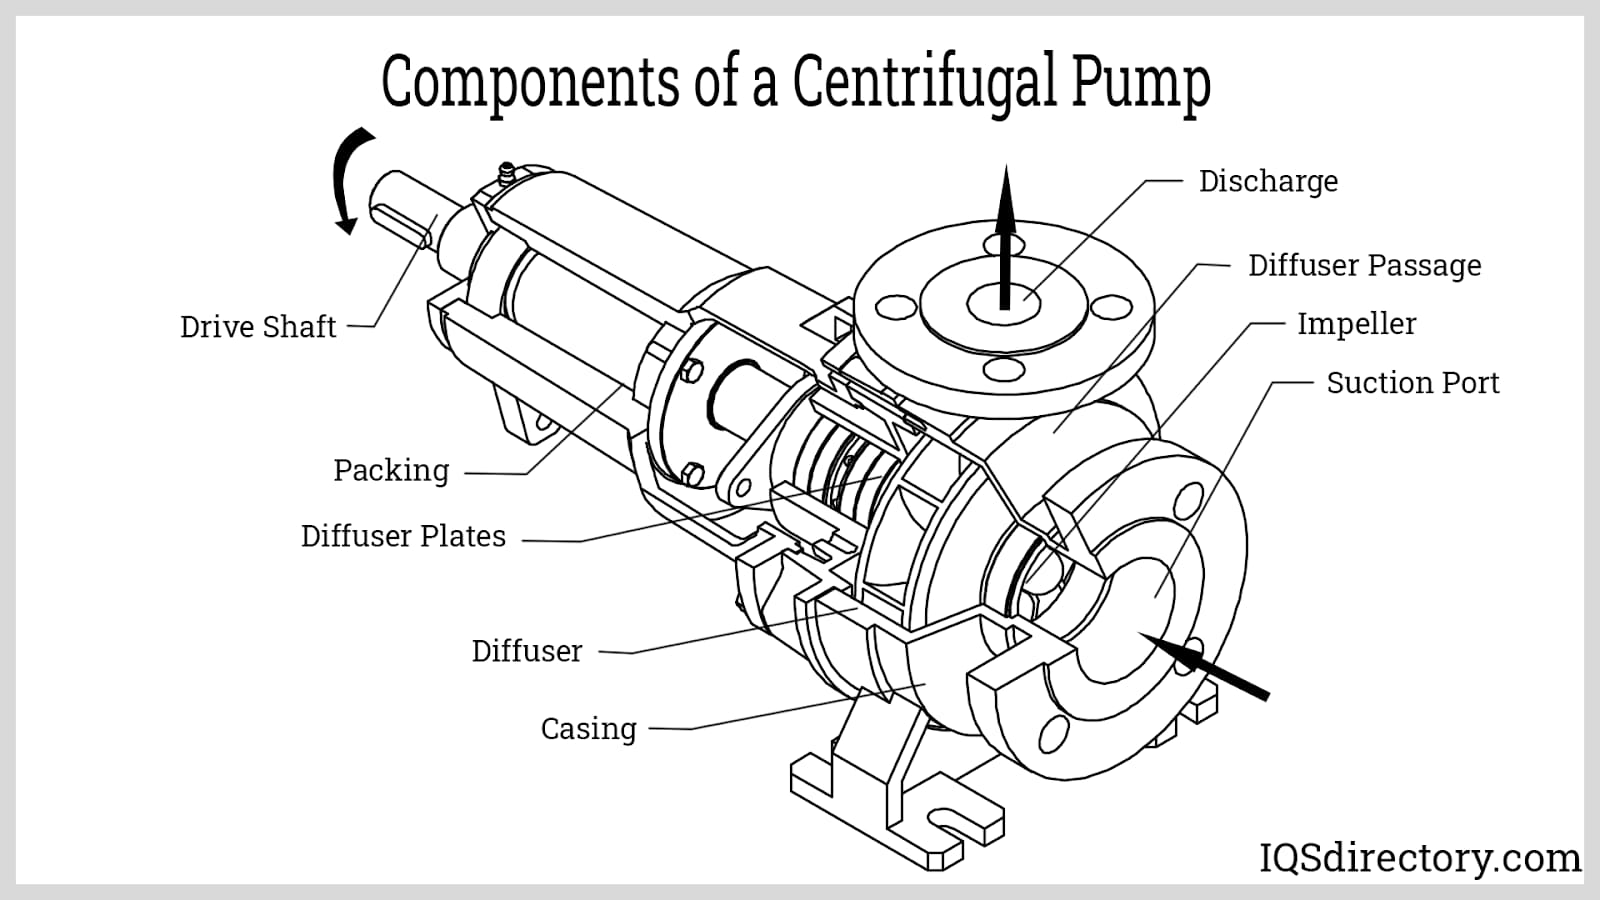 Components of a Centrifugal Pump